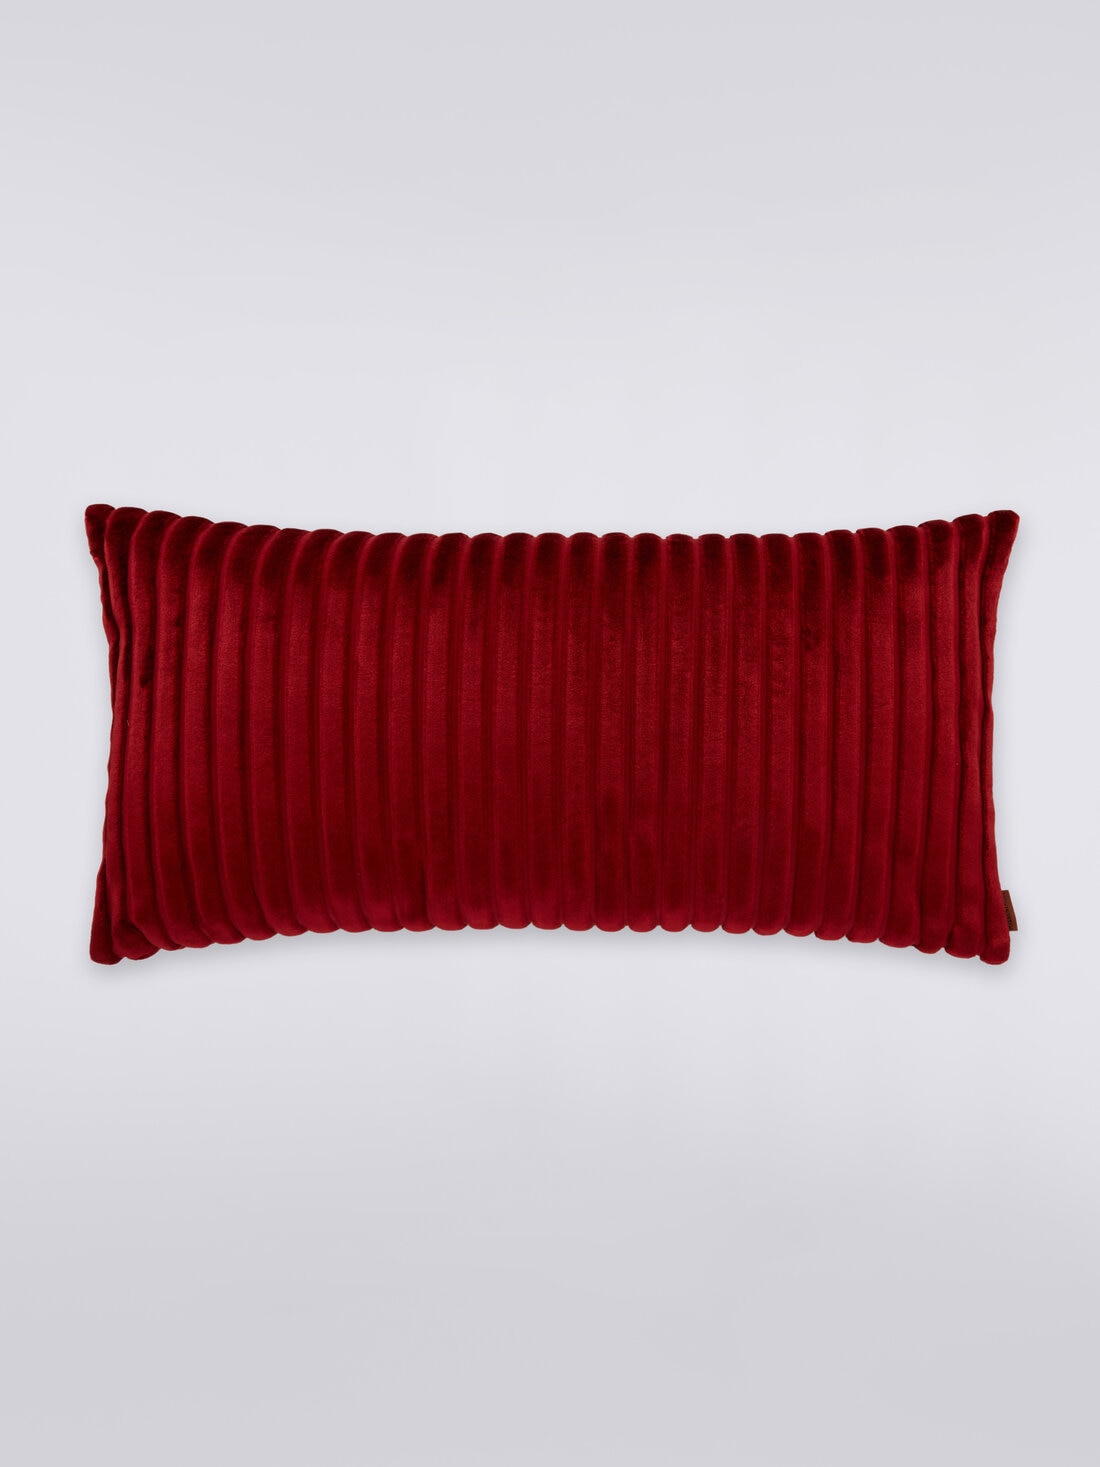 Coomba Cushion 30X60, Red  - 8033050074532 - 0